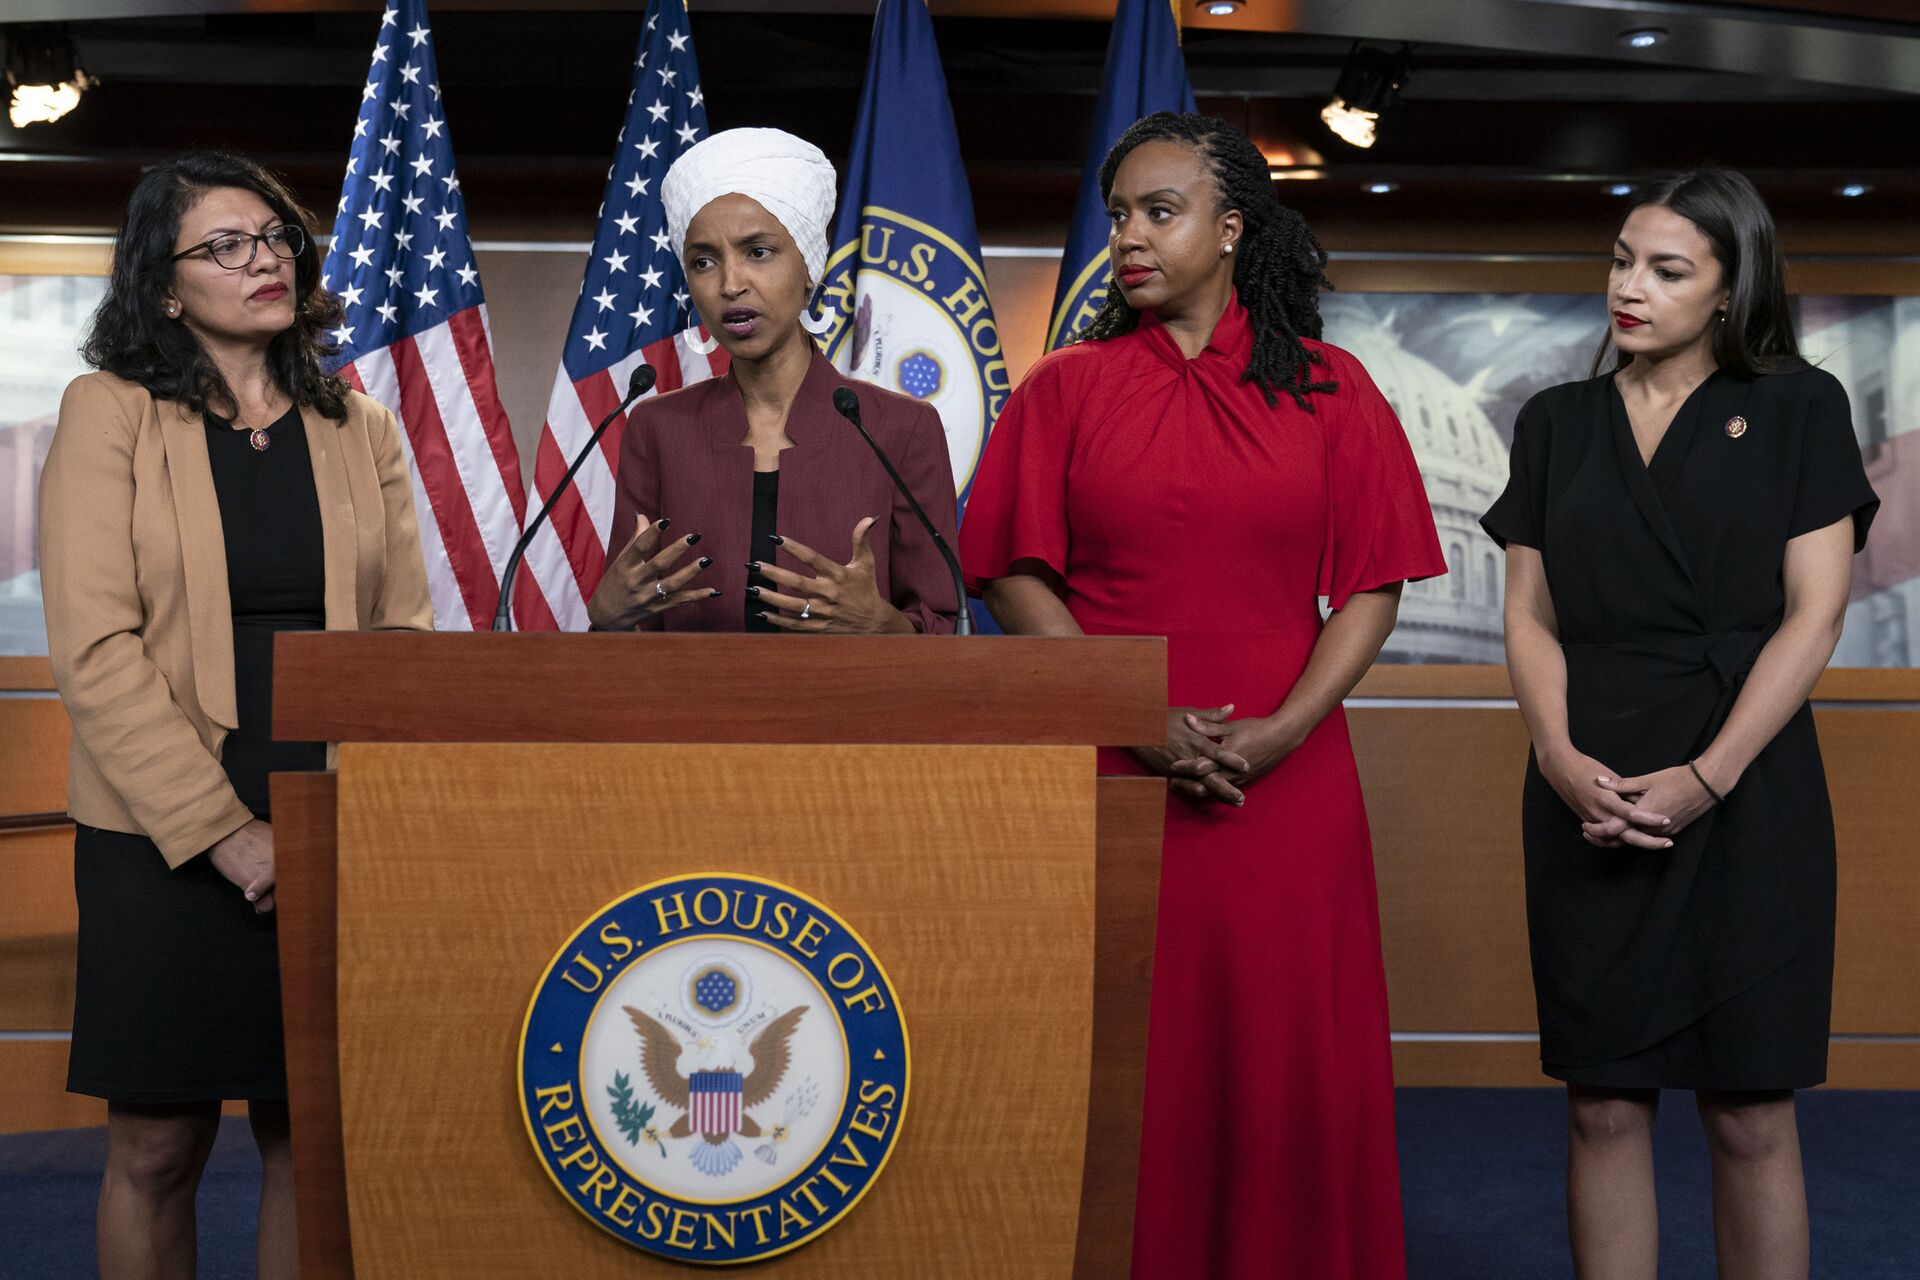 From left, U.S. Reps. Rashida Tlaib, D-Mich., Ilhan Omar, D-Minn., Ayanna Pressley, D-Mass., and Alexandria Ocasio-Cortez, D-N.Y., respond to base remarks by President Donald Trump after he called for four Democratic congresswomen of color to go back to their broken countries, as he exploited the nation's glaring racial divisions once again for political gain, during a news conference at the Capitol in Washington, Monday, July 15, 2019 - Sputnik International, 1920, 07.10.2021